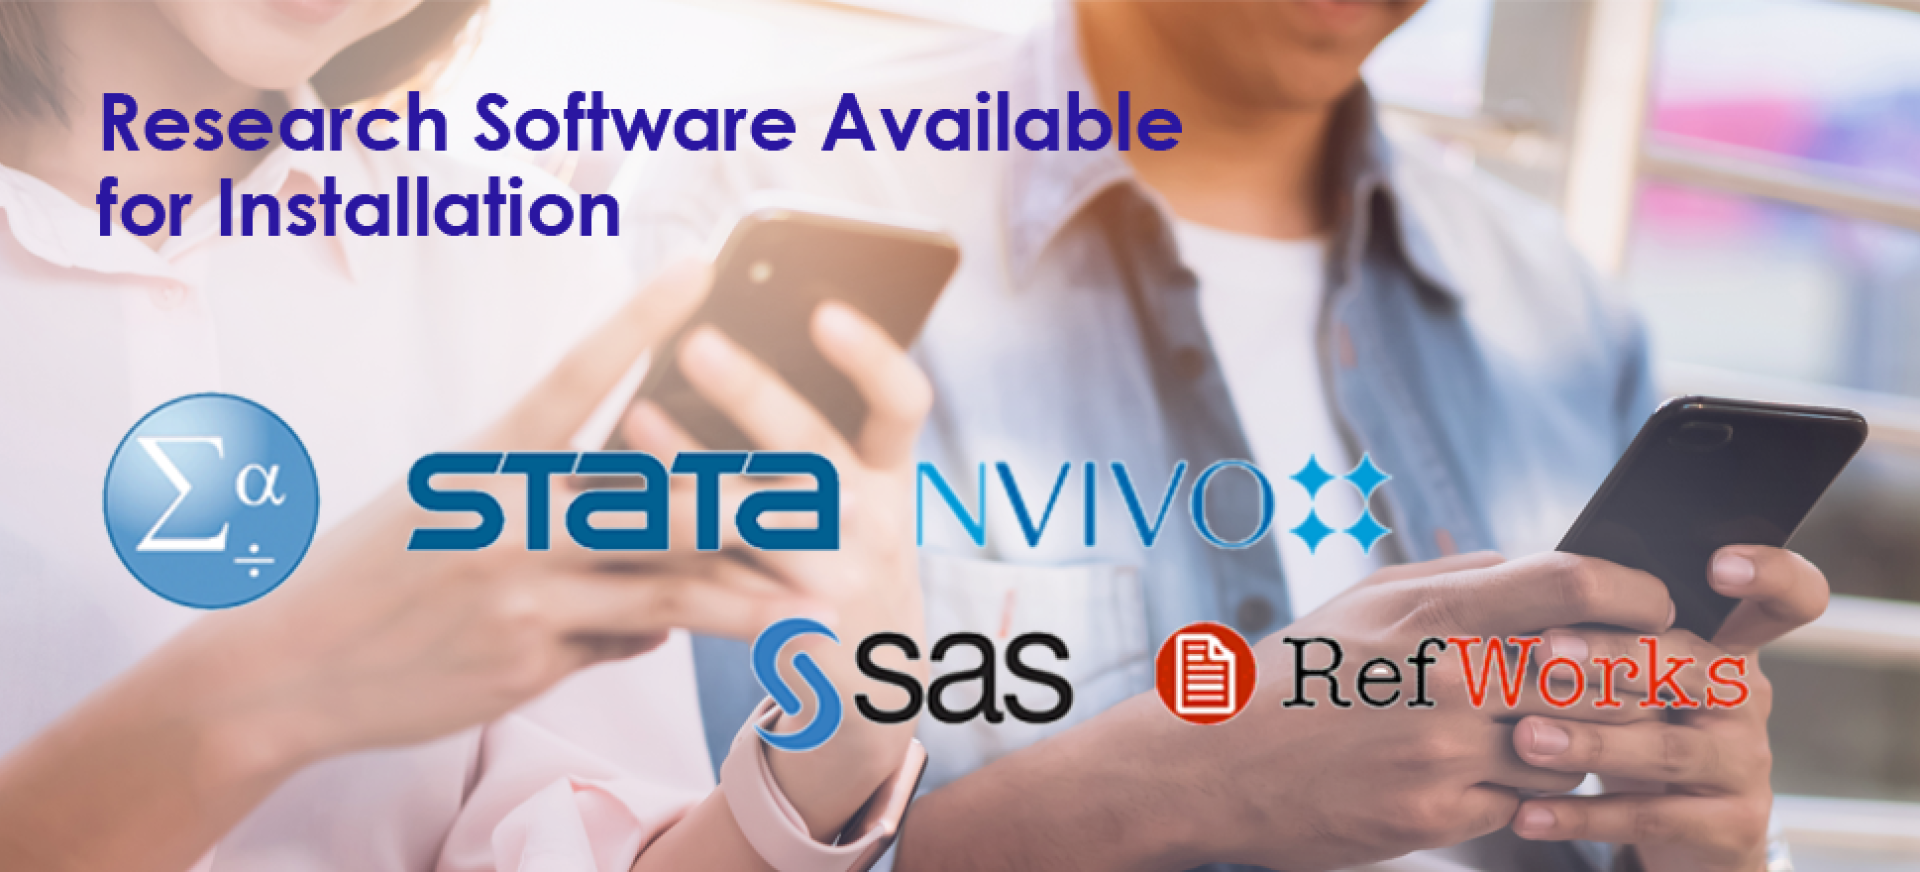 Research Software Available for Installation